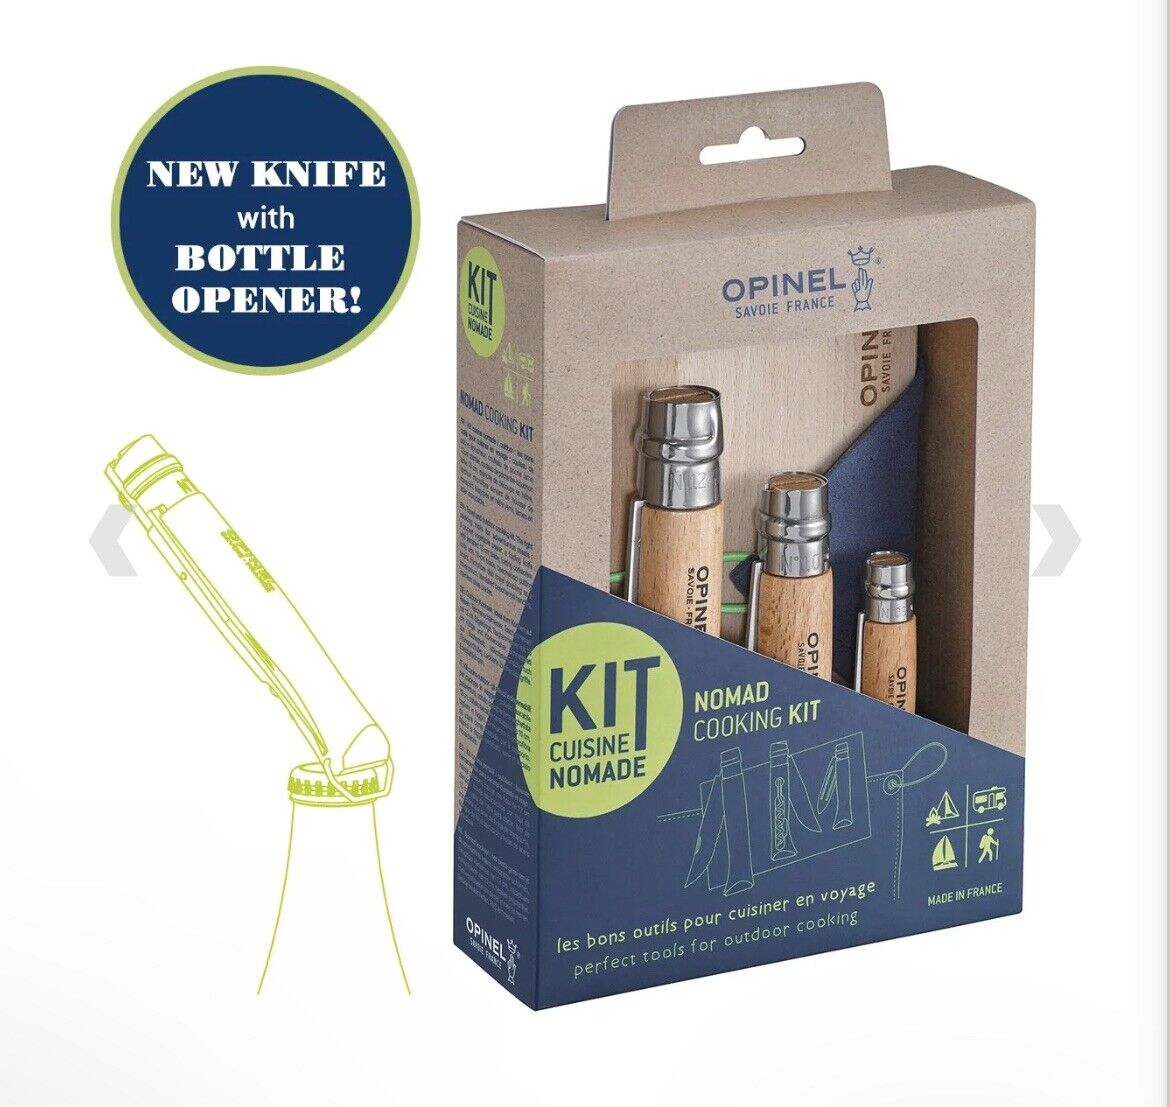 OPINEL FRANCE NOMAD COOKING KIT (002177) - BRAND NEW IN BOX